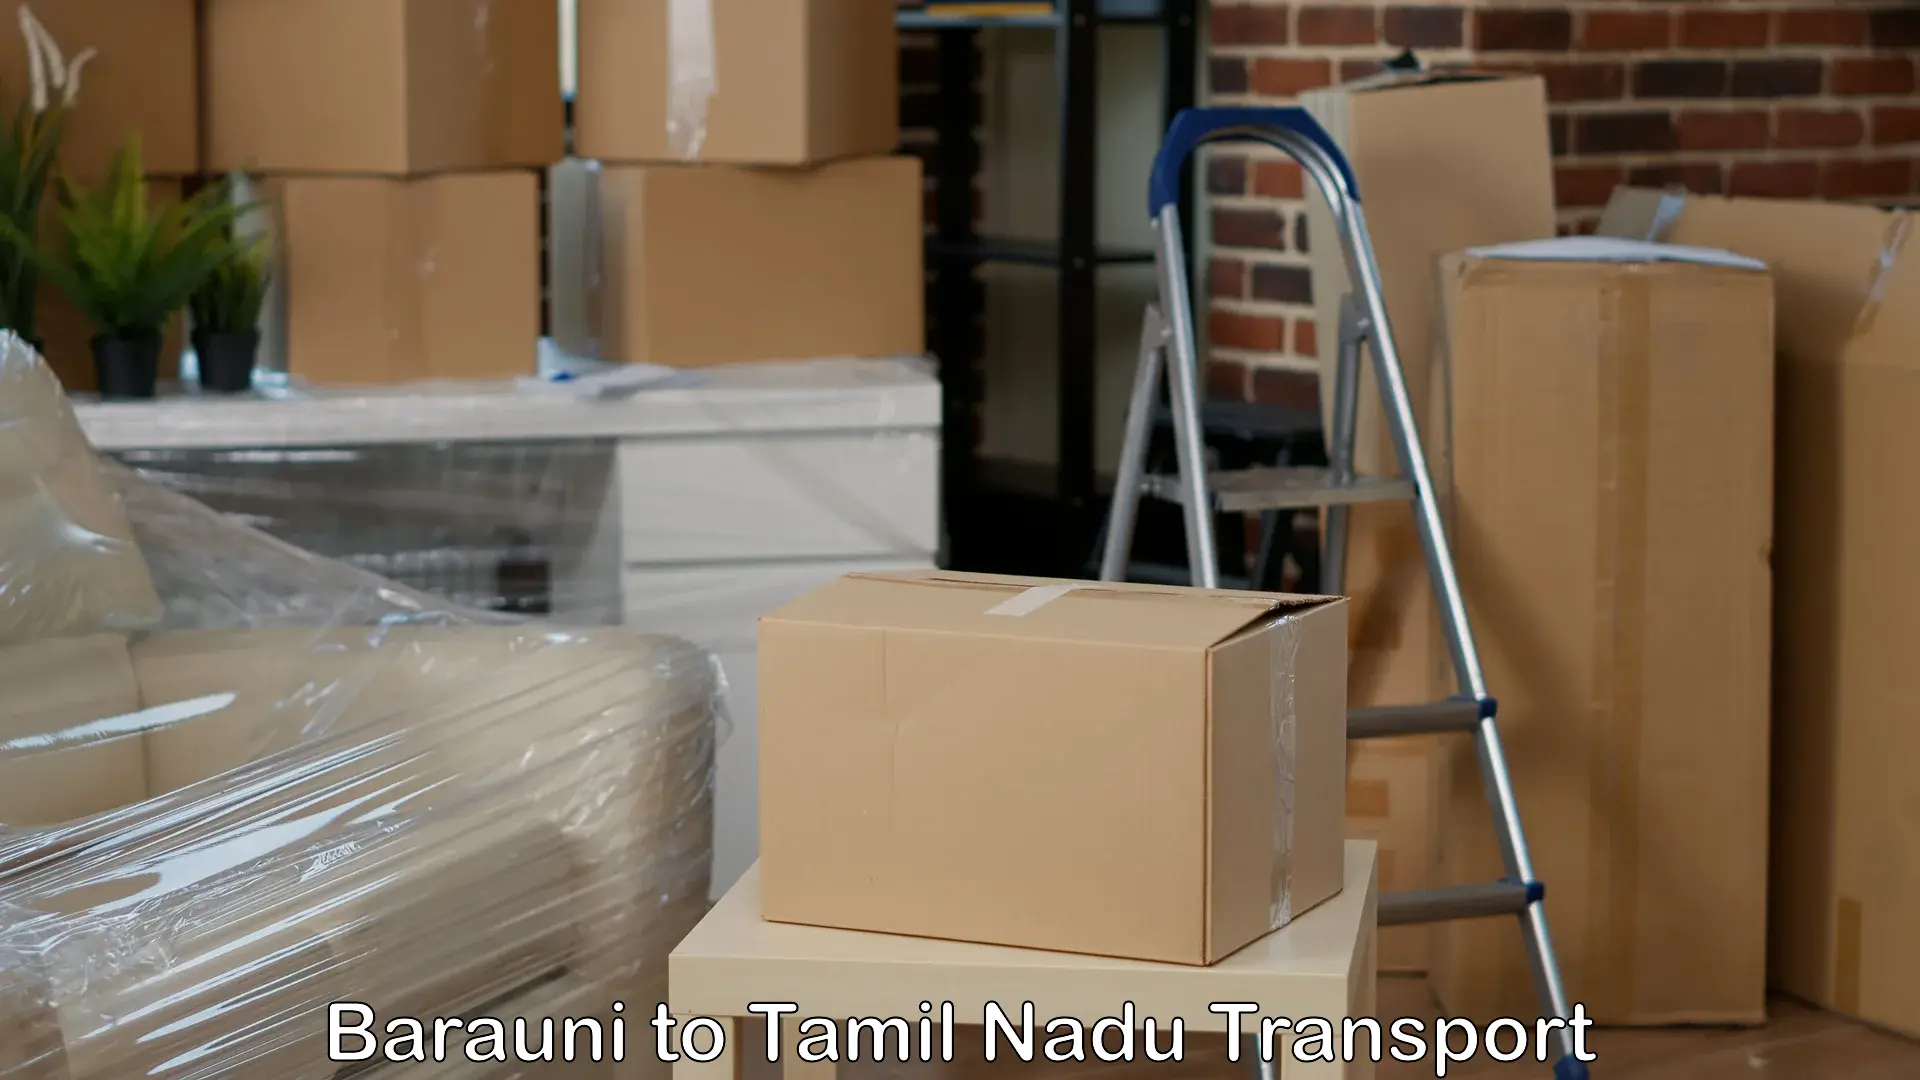 Delivery service Barauni to Thondi